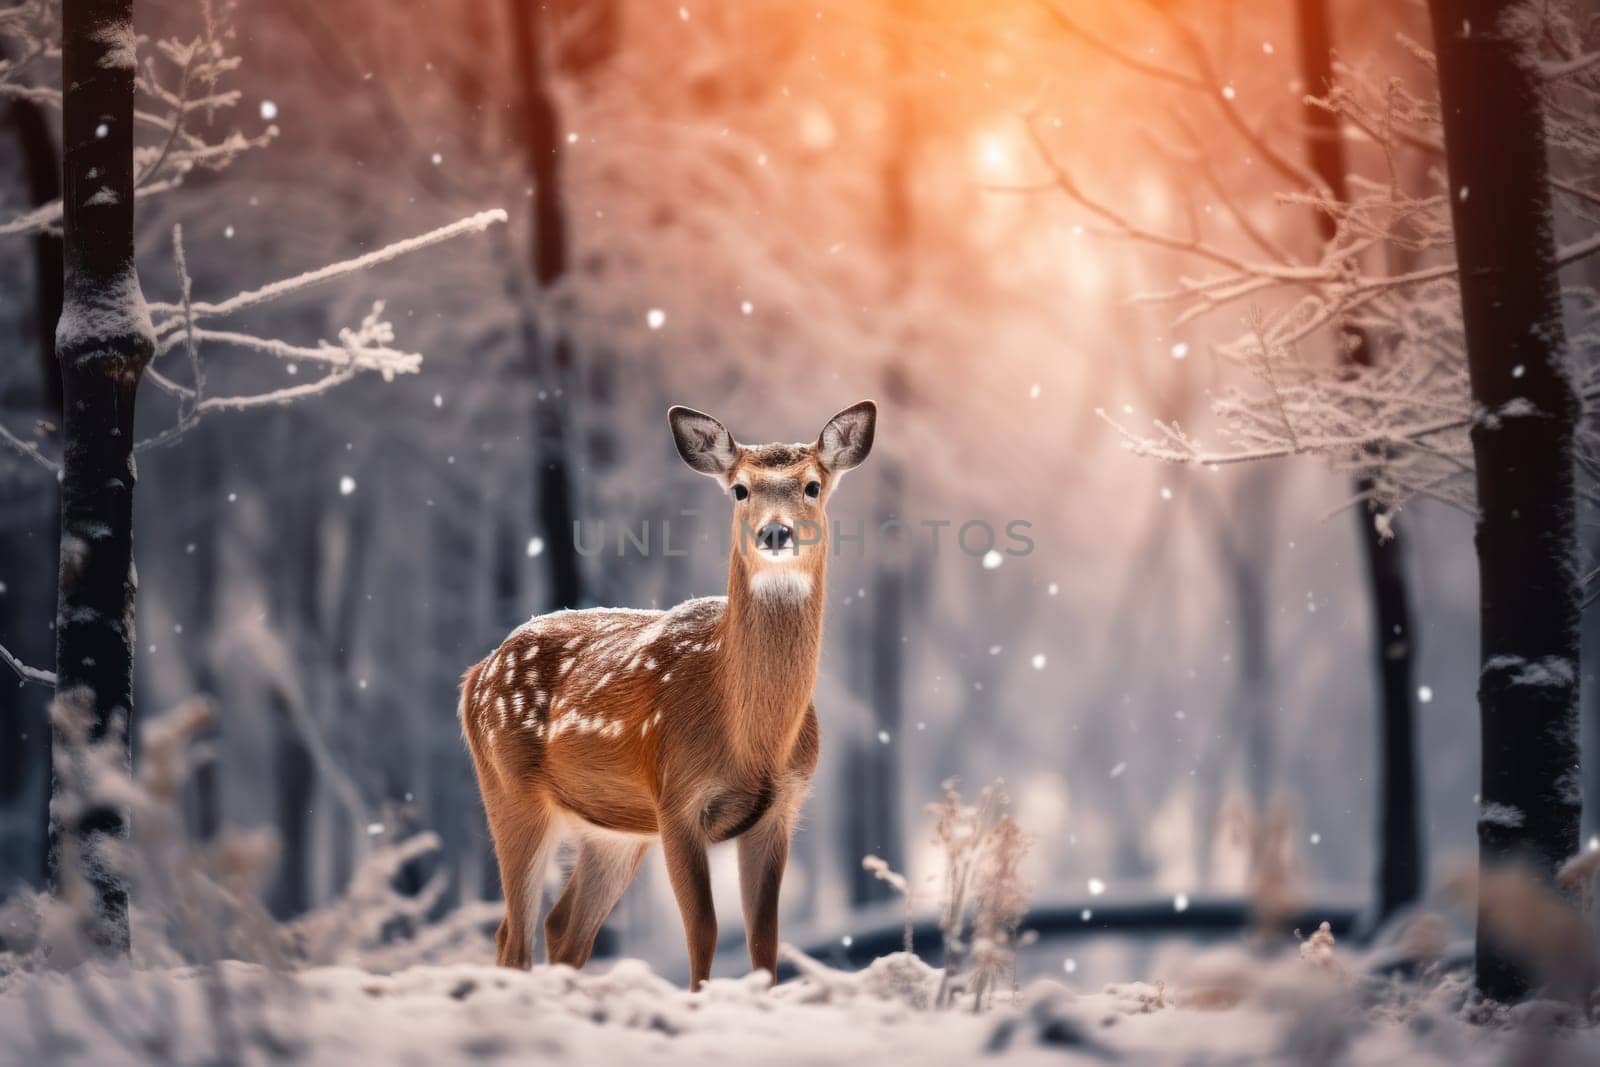 An enchanting winter tableau, showcasing the grace and resilience of wildlife, including deer, birds, and squirrels, in their natural habitats during the frosty season.